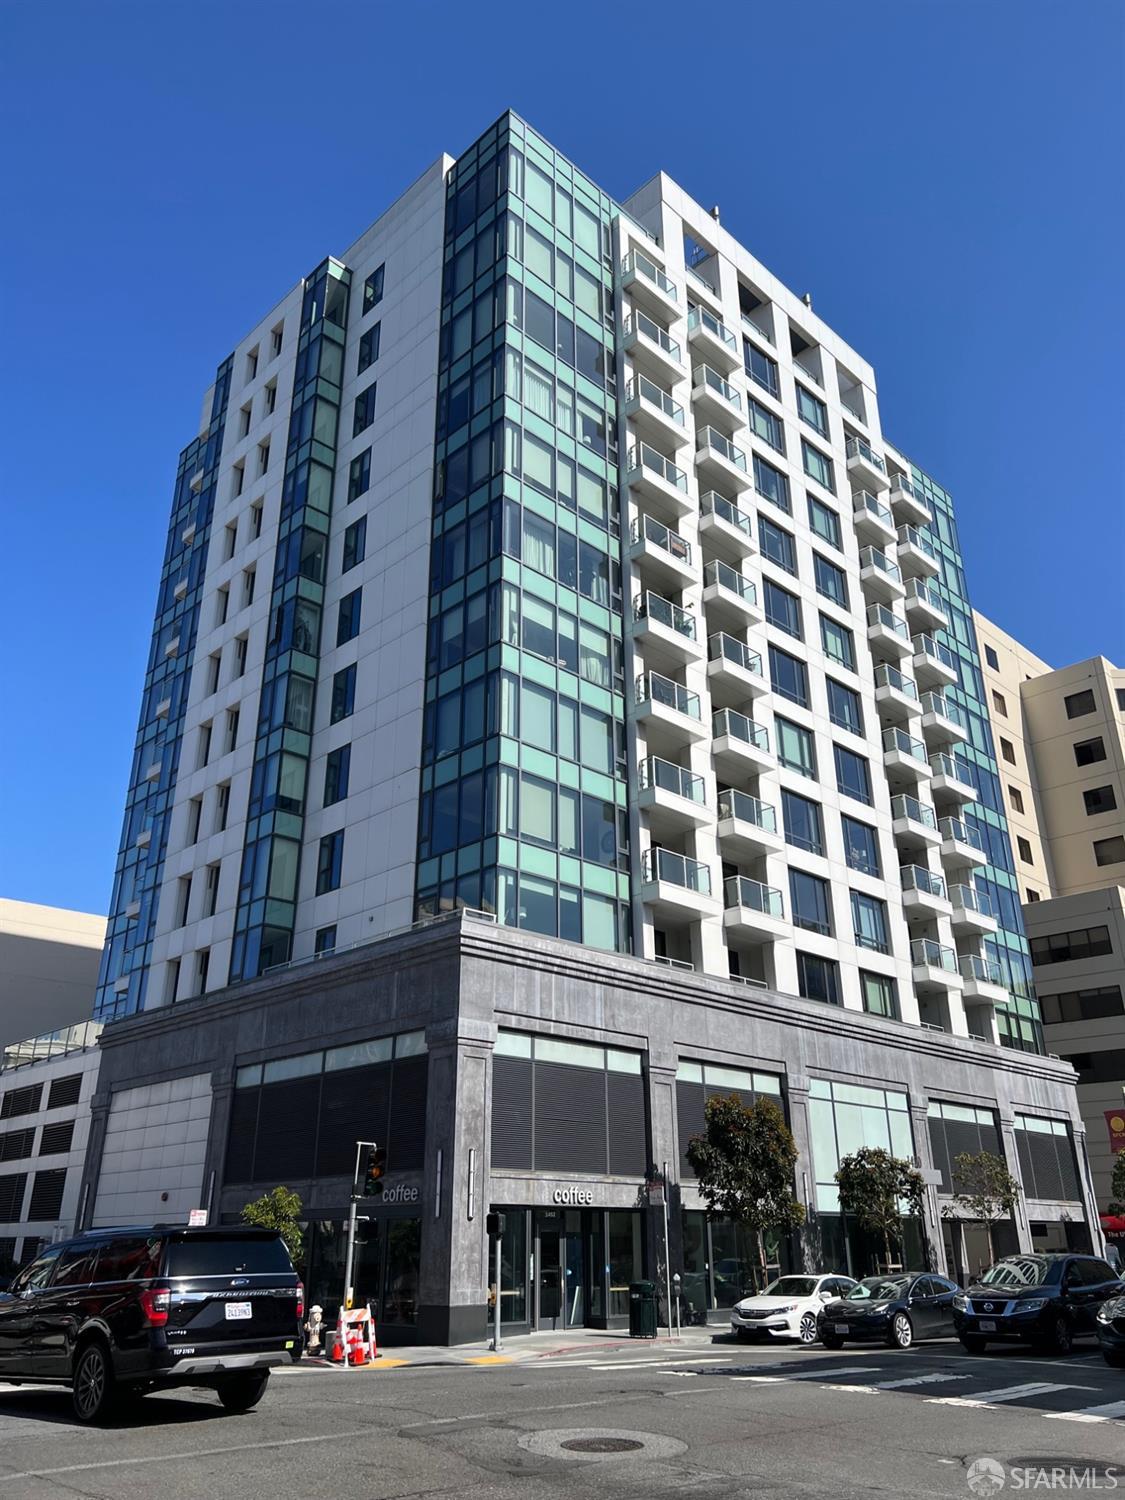 Photo of 1450 Franklin St #403 in San Francisco, CA